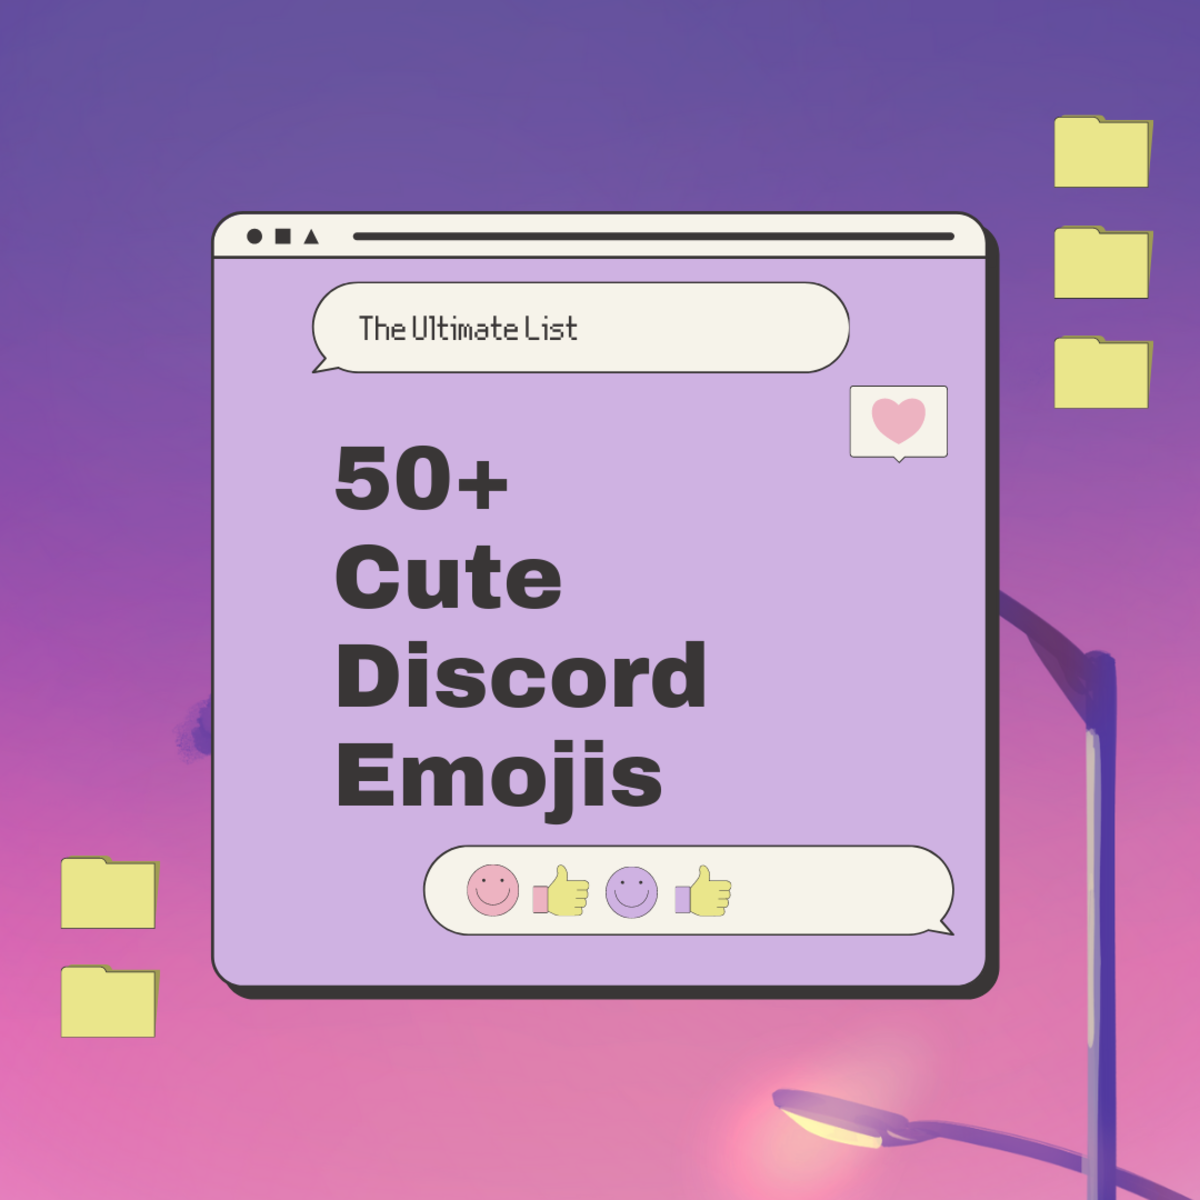 Discover over 50 cute Discord emoji in this list!